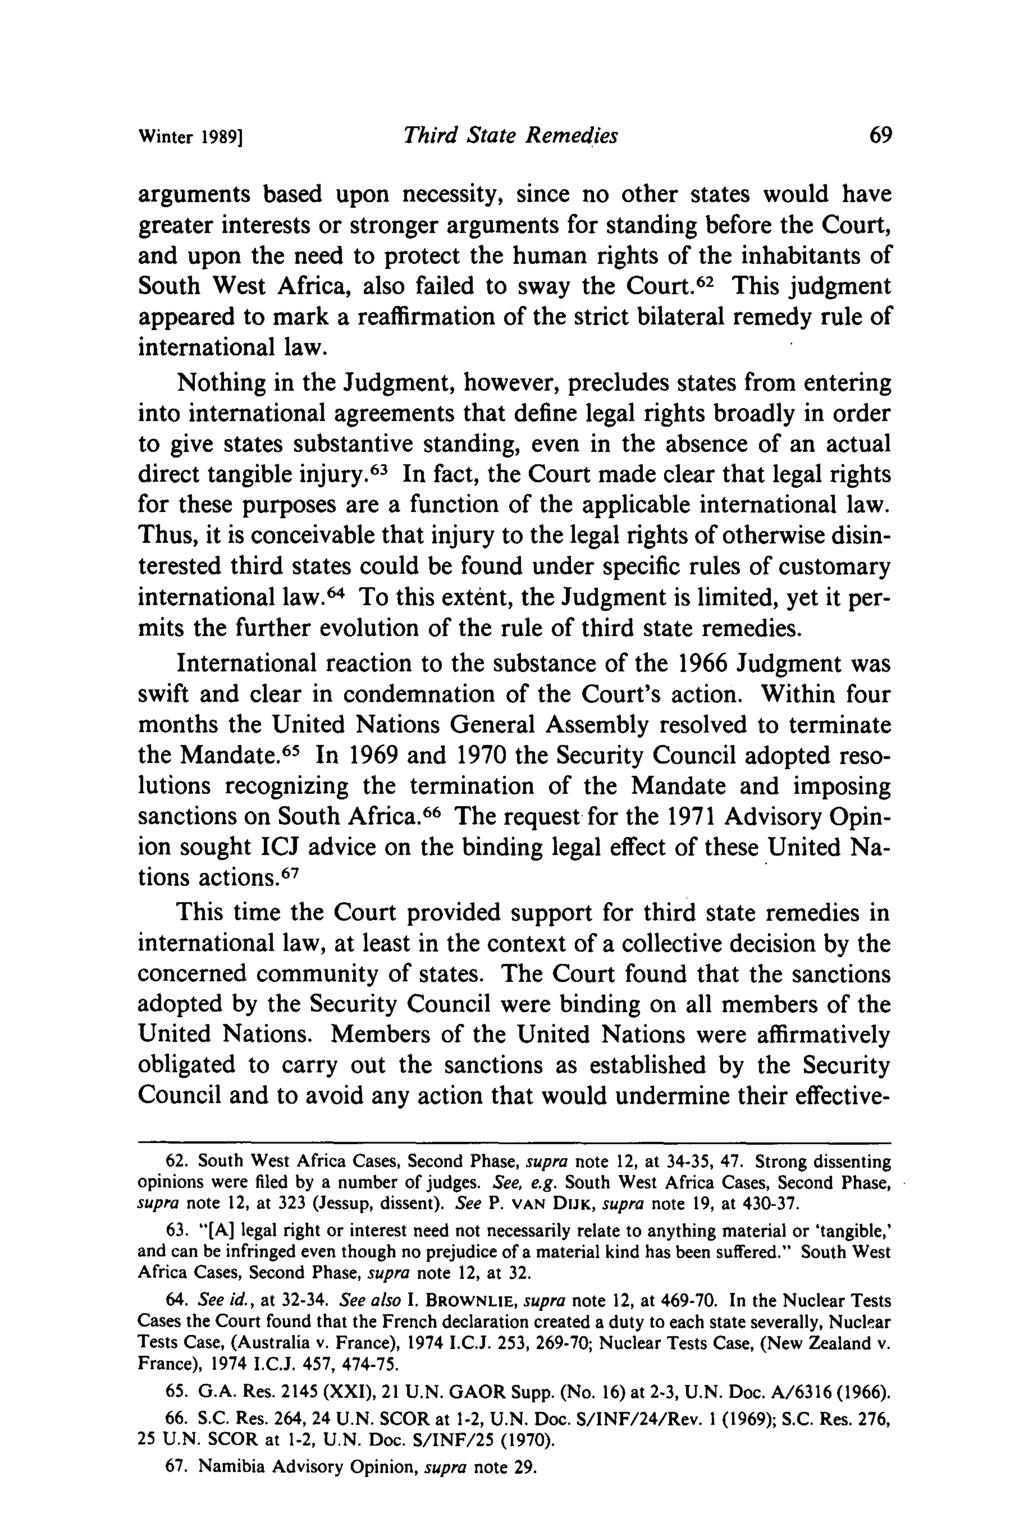 Winter 1989] Third State Remedies arguments based upon necessity, since no other states would have greater interests or stronger arguments for standing before the Court, and upon the need to protect